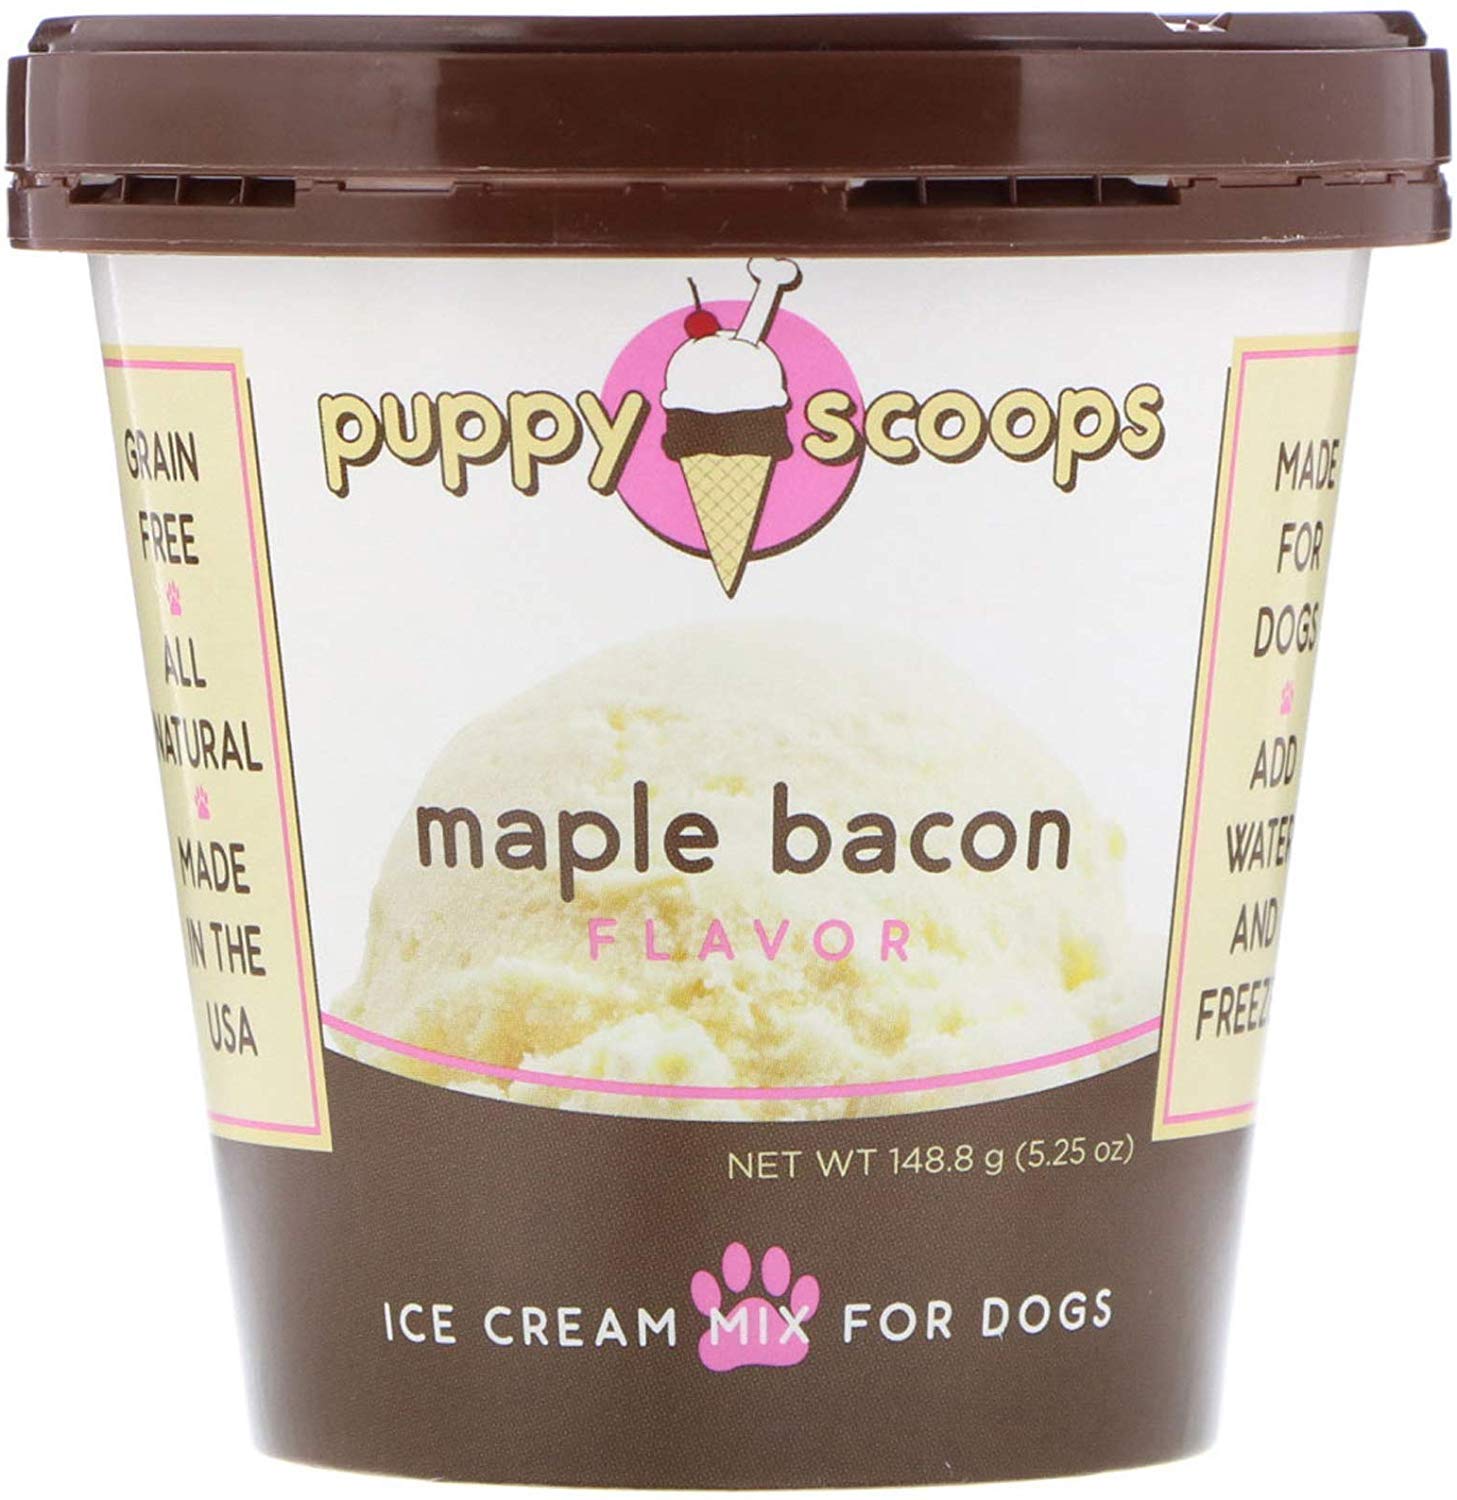 Puppy Scoops Ice Cream Mix for Dogs: Maple Bacon - Add Water and Freeze at Home